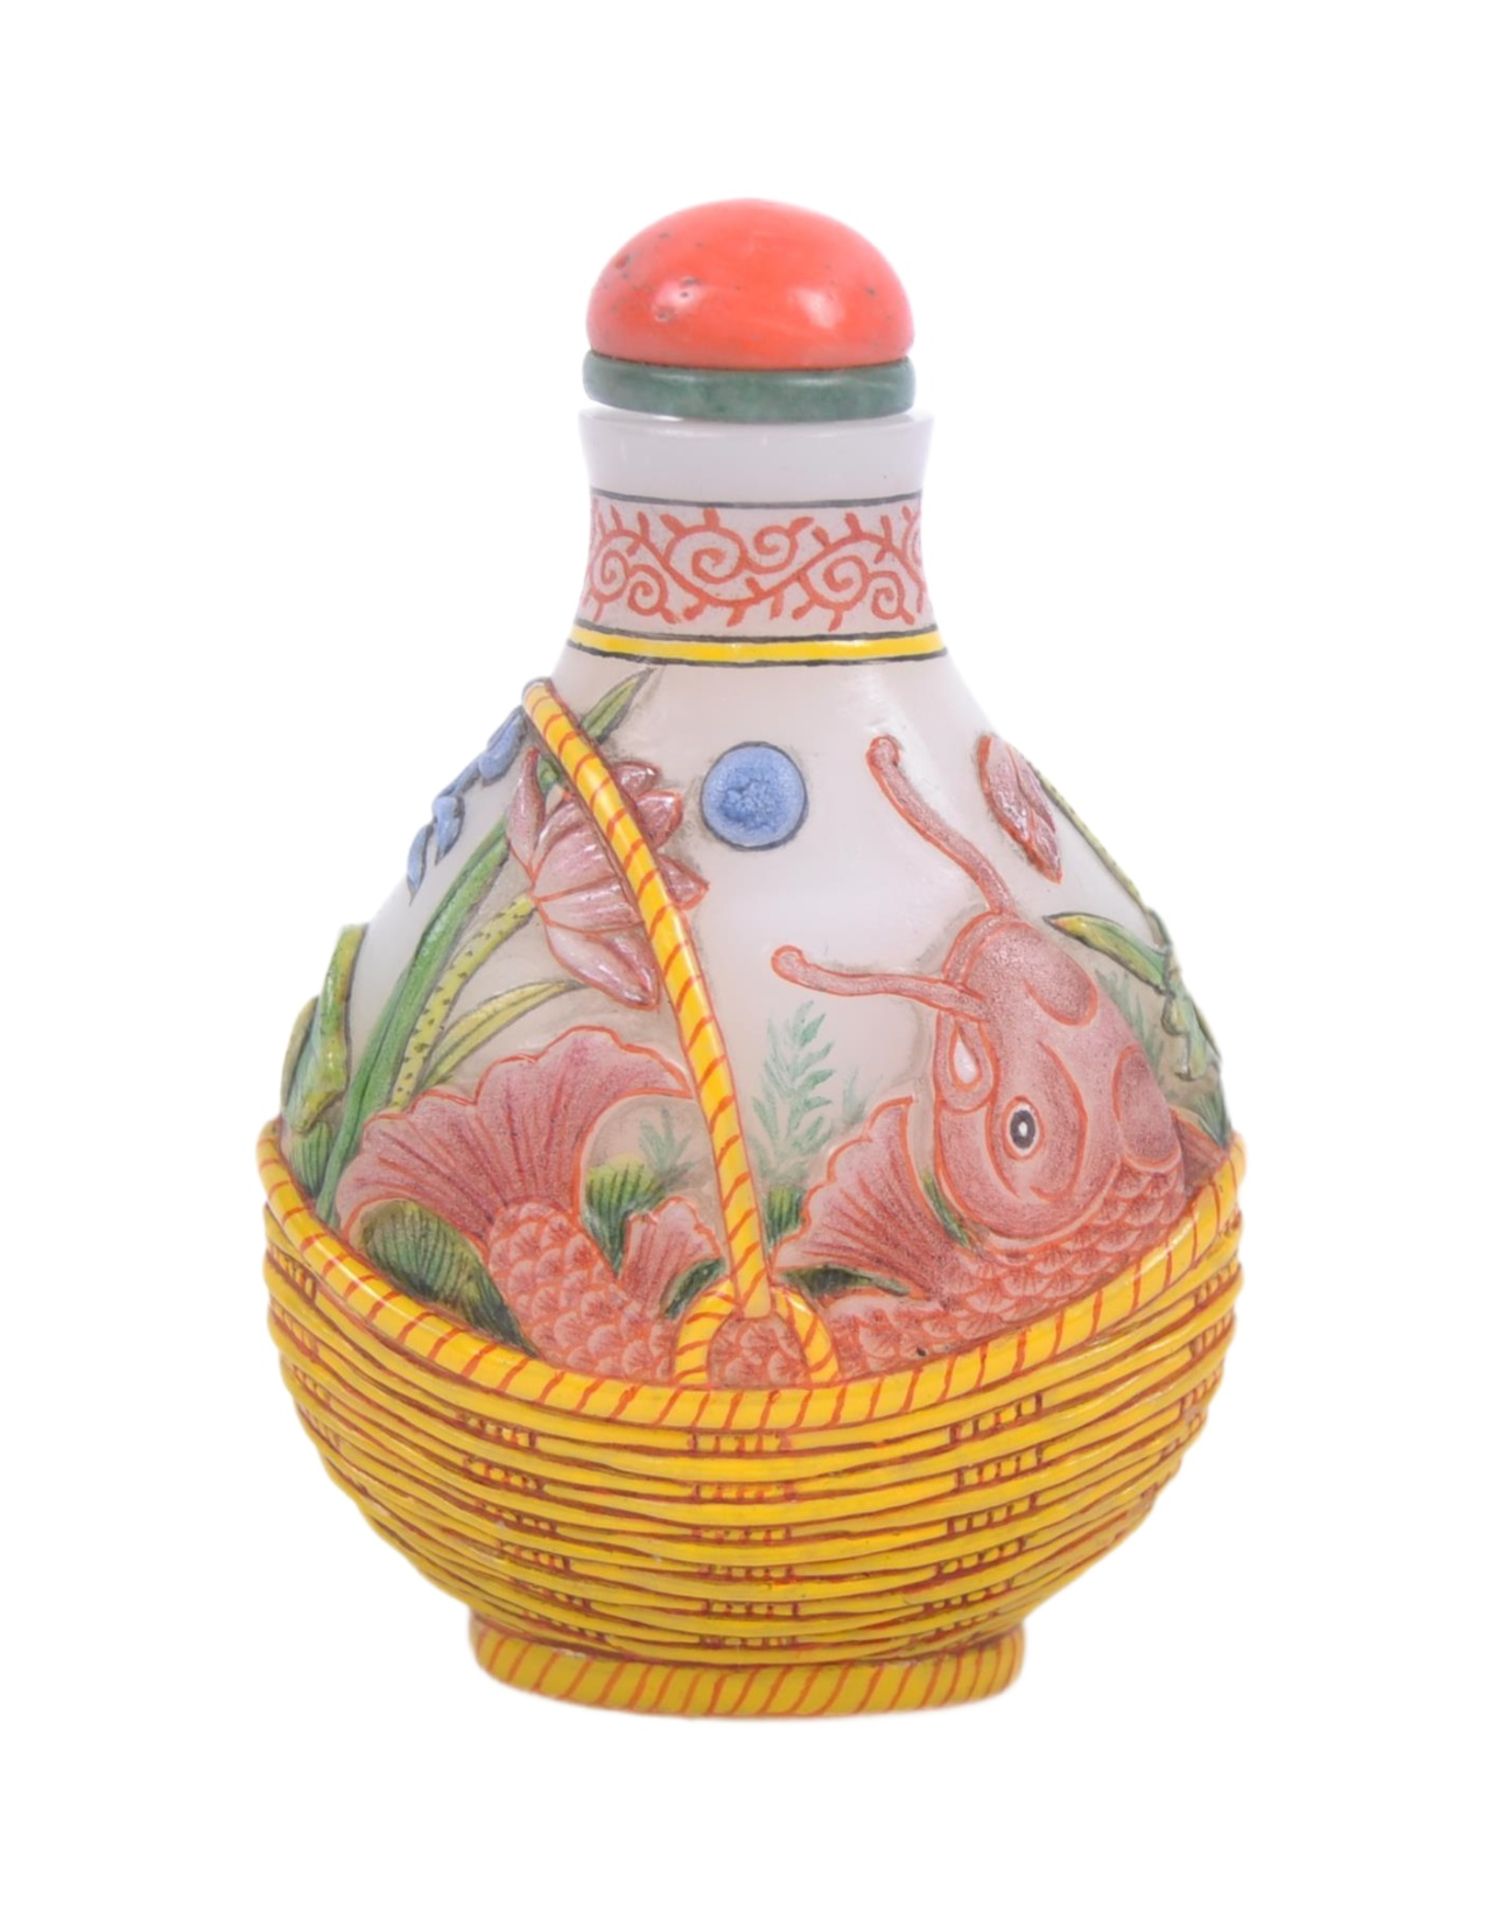 EARLY 20TH CENTURY CHINESE GLASS SNUFF BOTTLE